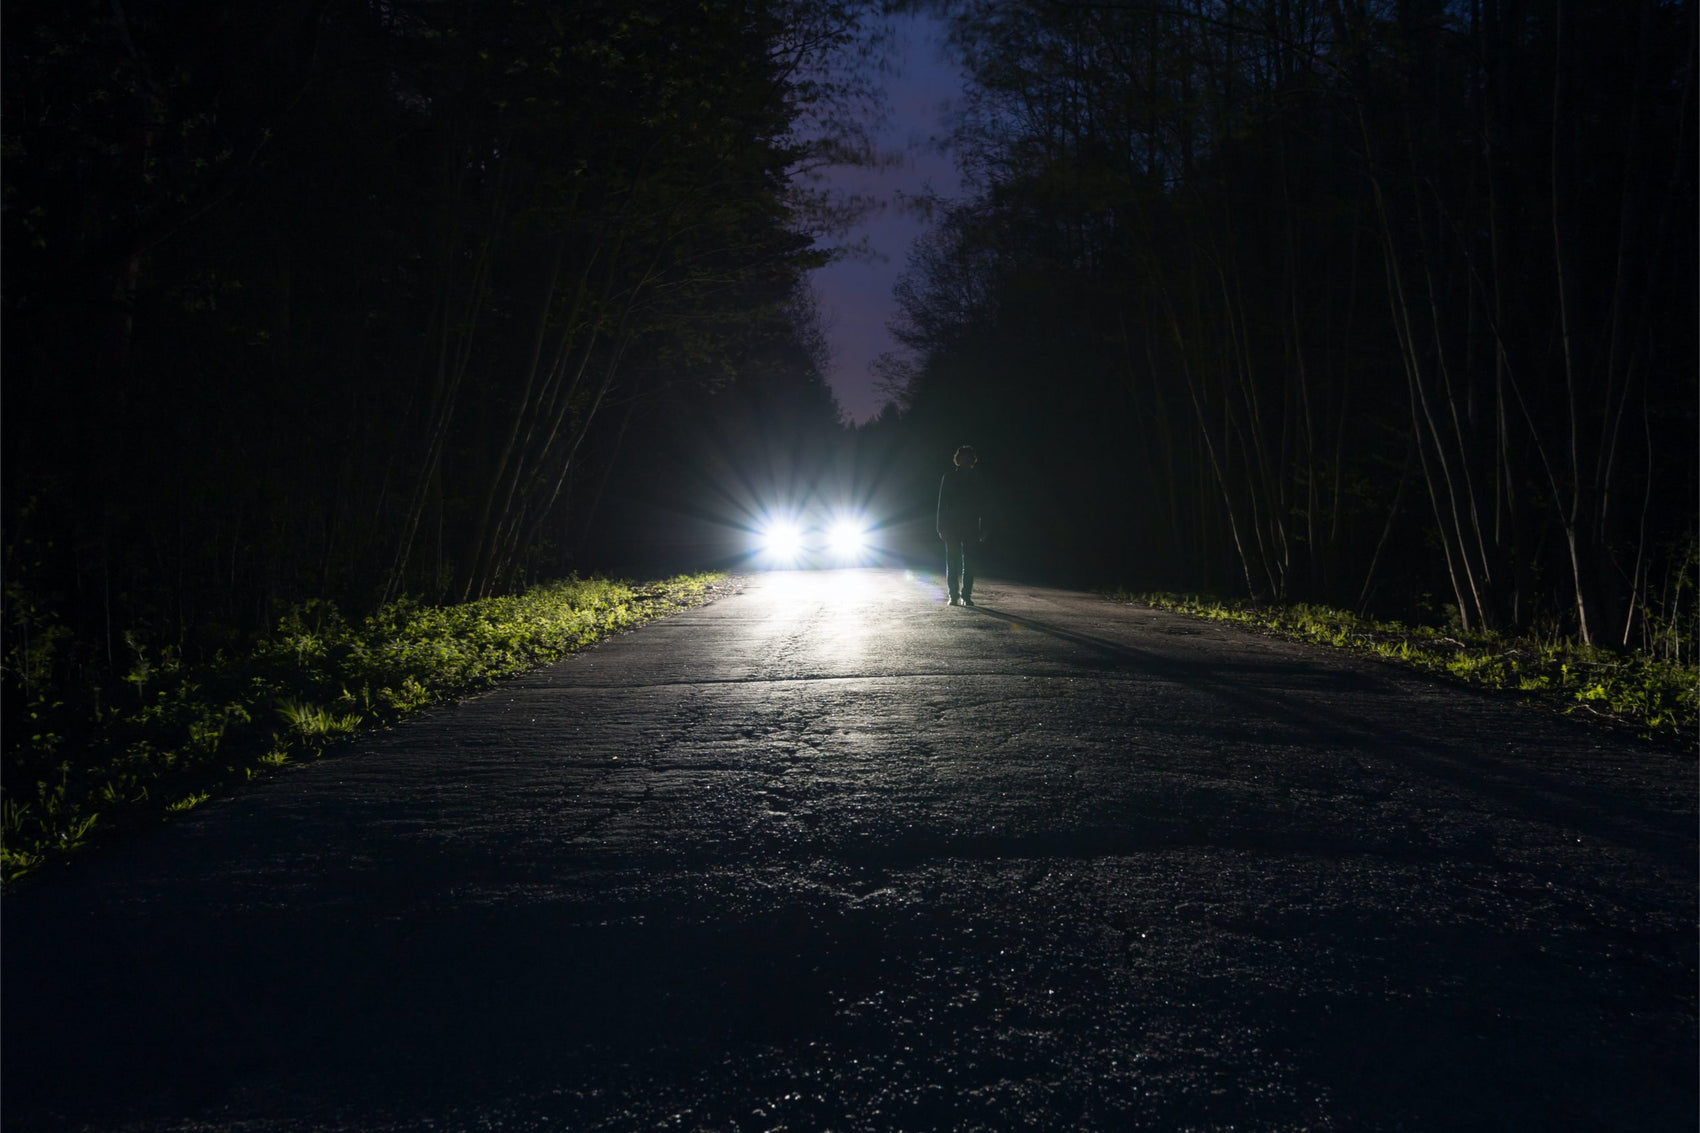 Front view of headlight beams in the distant at night on a dark road.